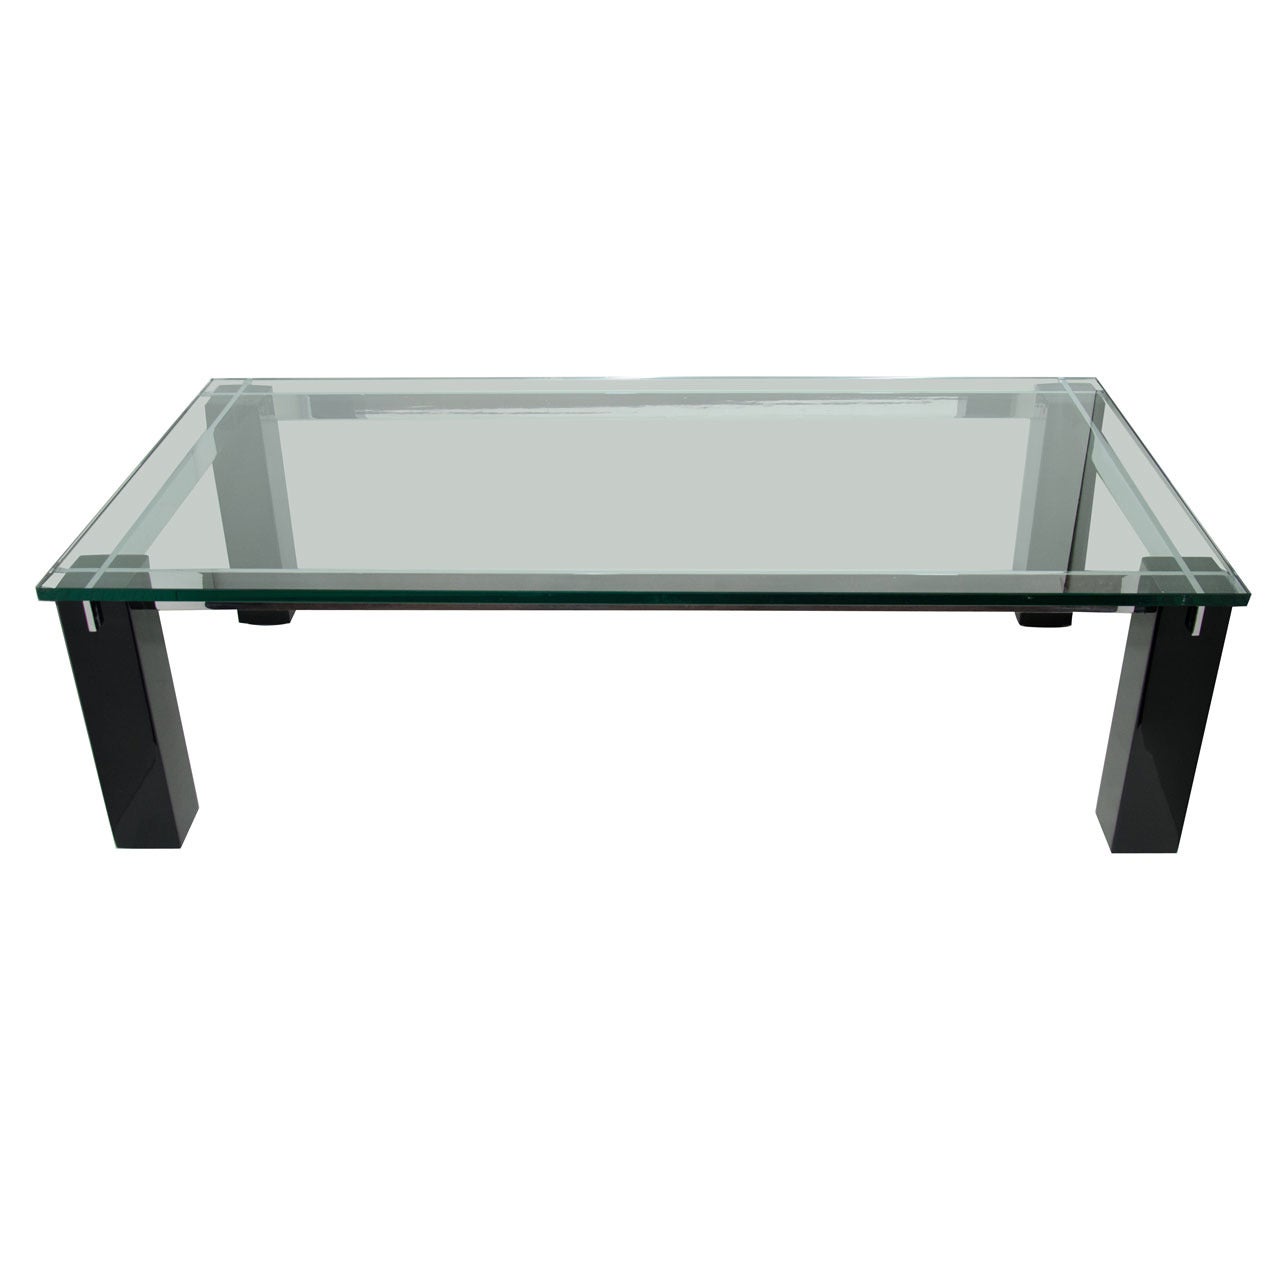 Large Mid-Century Modern coffee table with architectural design. Features heavy glass top over ebonized mahogany wood block base. Chromed steel bars are inset into the block wood legs vertically and horizontally, creating a crossbar designs.